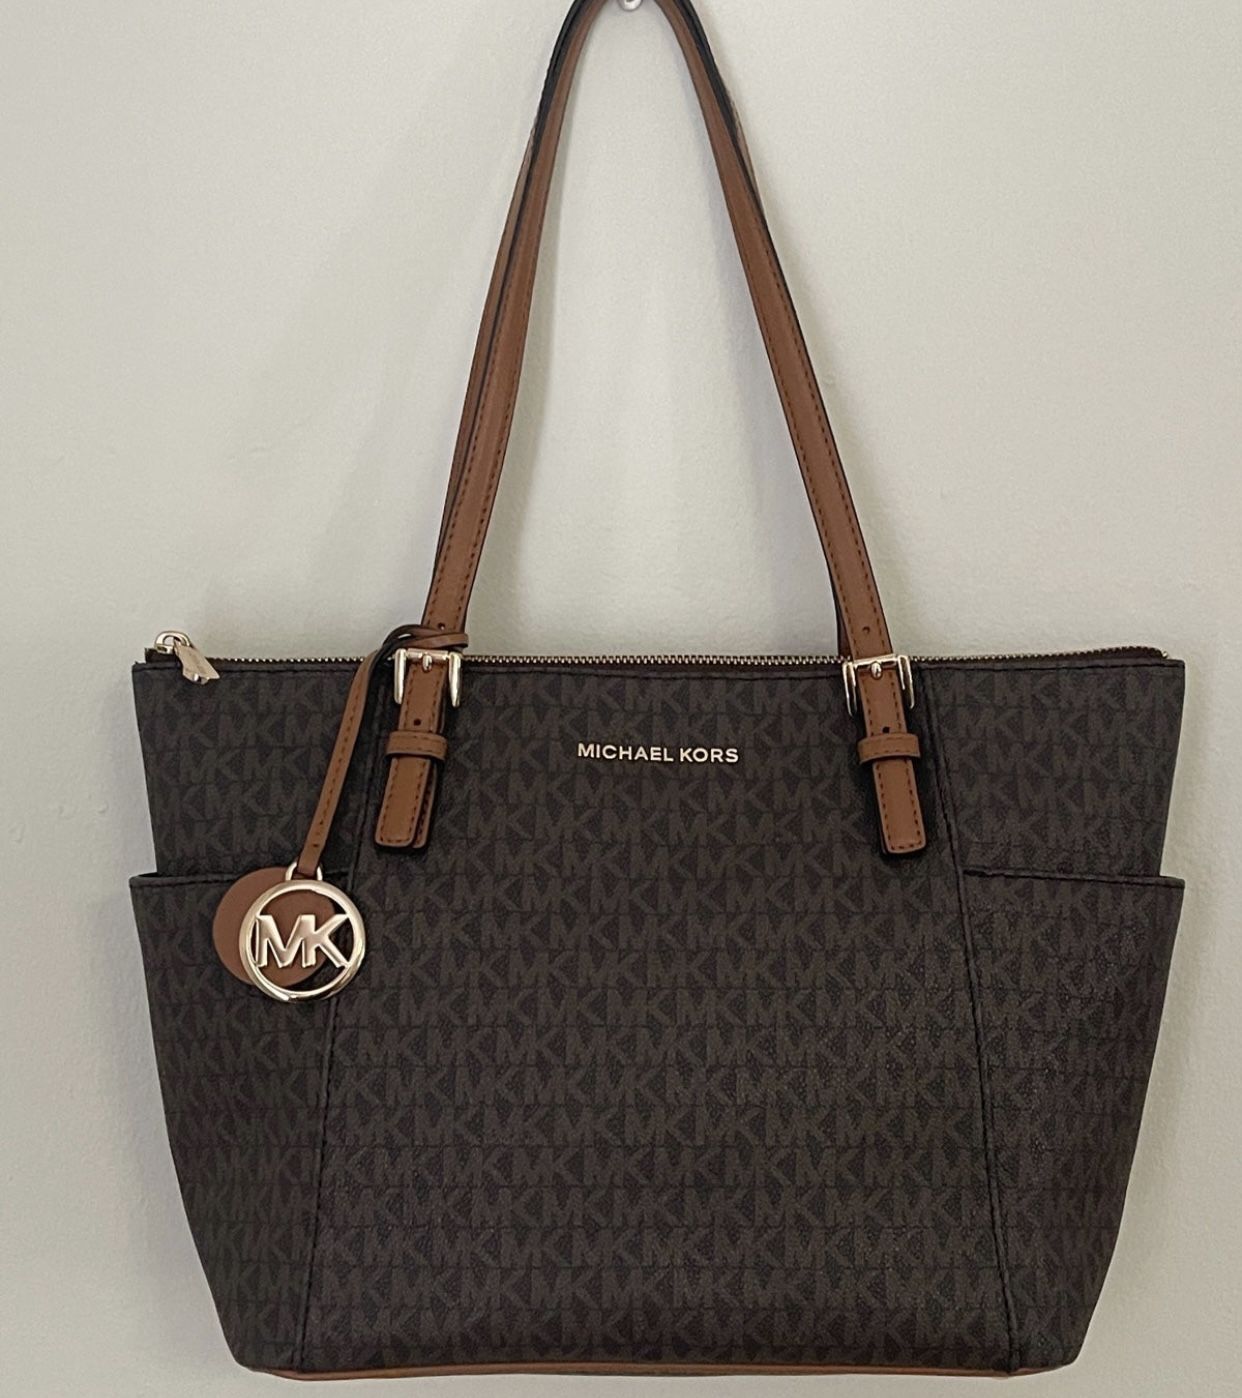 Michael Kors Bags & Totes from $89 Shipped (Regularly $300)